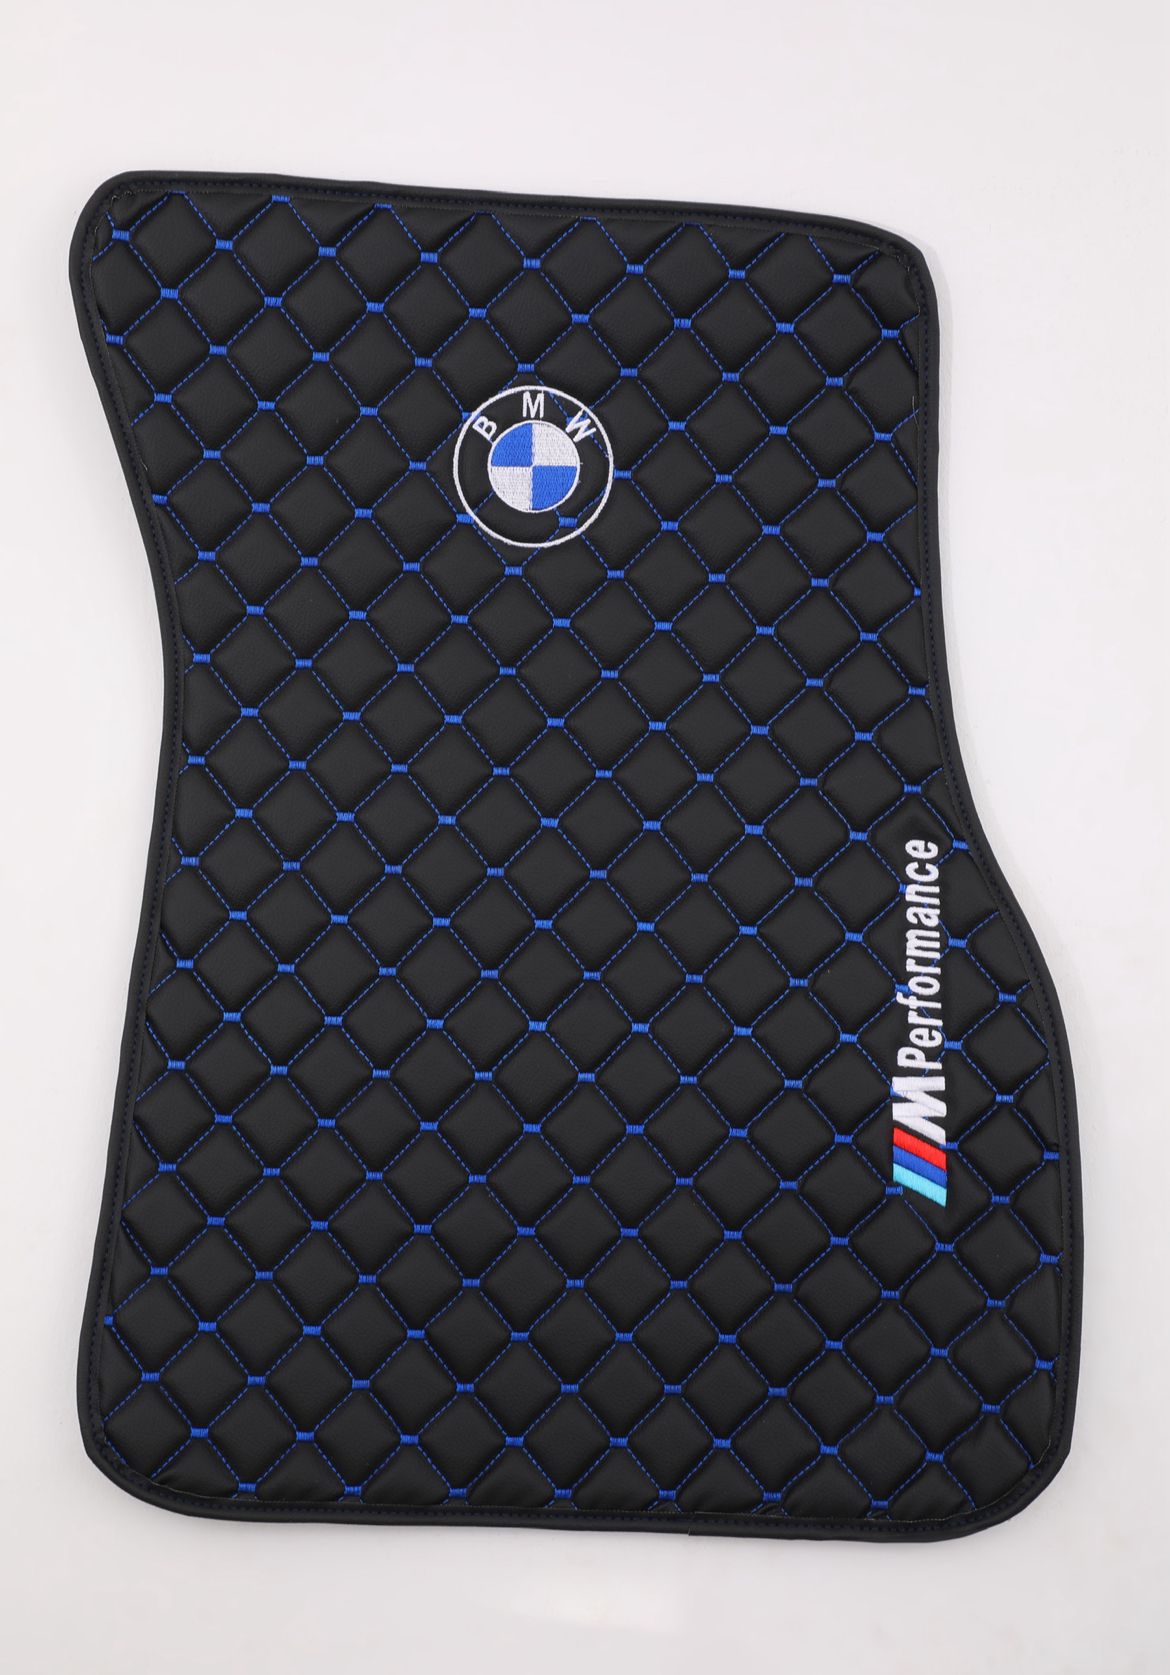 For all BMW E92 M Performance Luxury Leather Custom Car Mat 4x